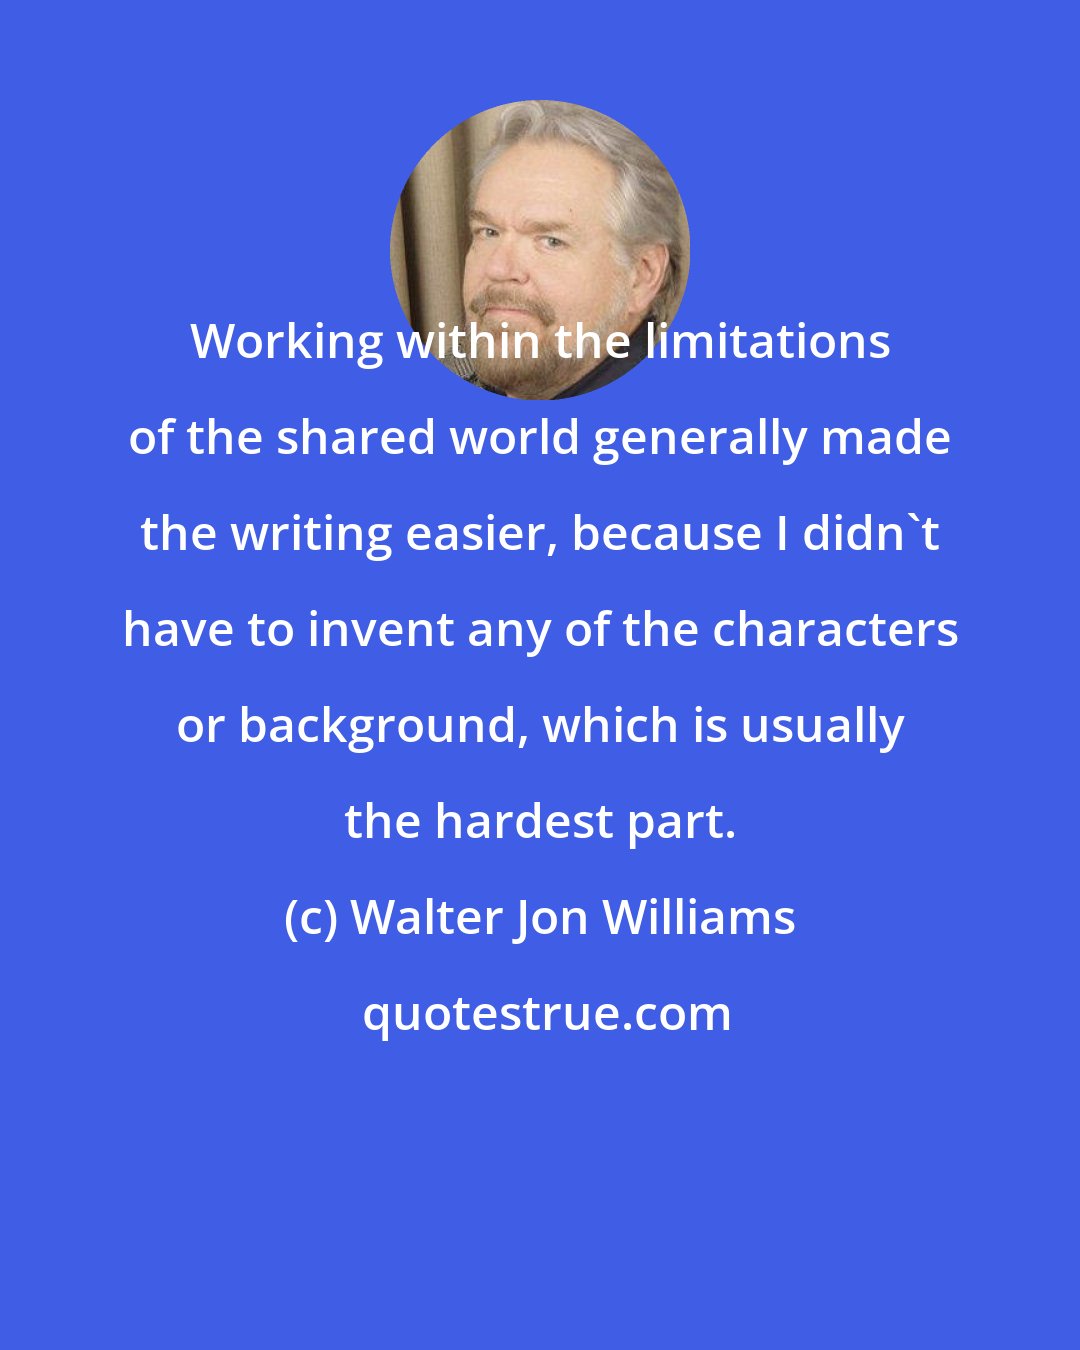 Walter Jon Williams: Working within the limitations of the shared world generally made the writing easier, because I didn't have to invent any of the characters or background, which is usually the hardest part.